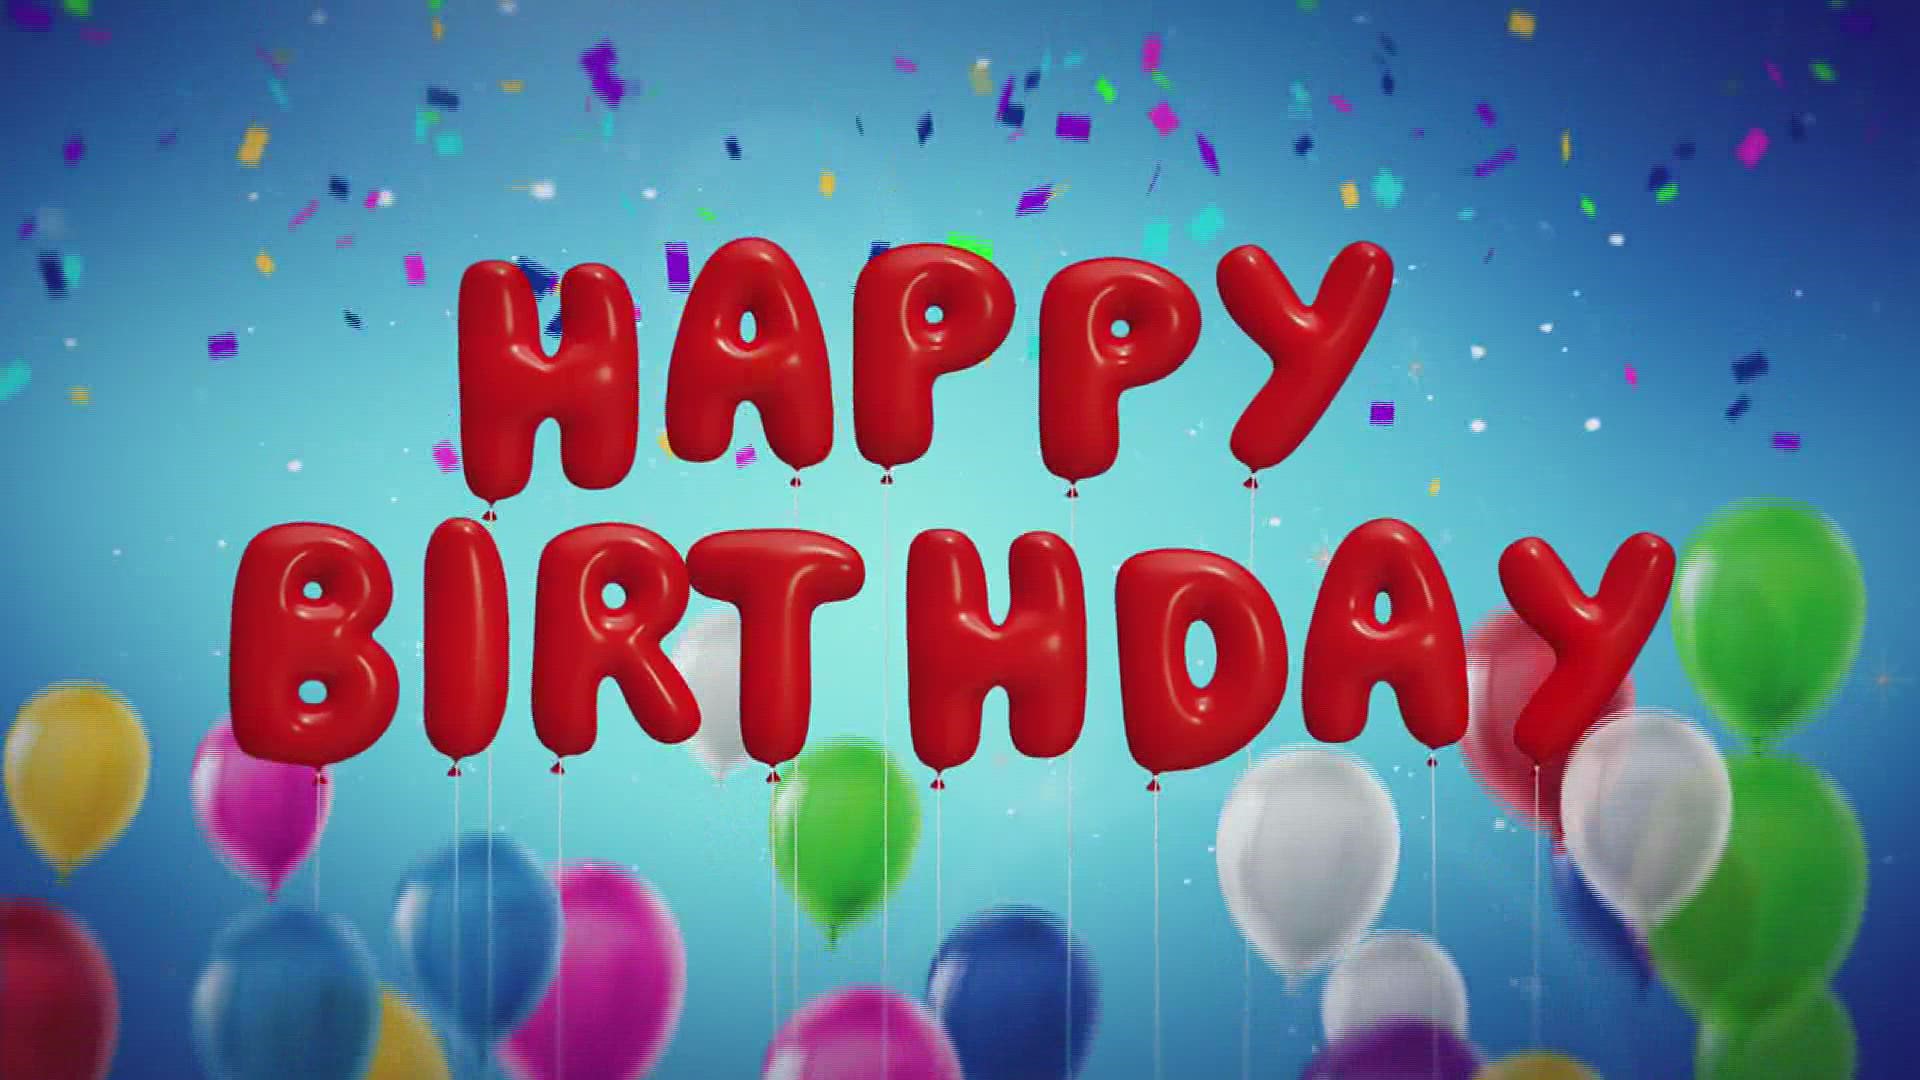 :  Bookmark this video to save it! Submit birthdays and enter the cookie contest by visiting 12NewsNow.com/Birthdays BEFORE midnight the night before the birthday.